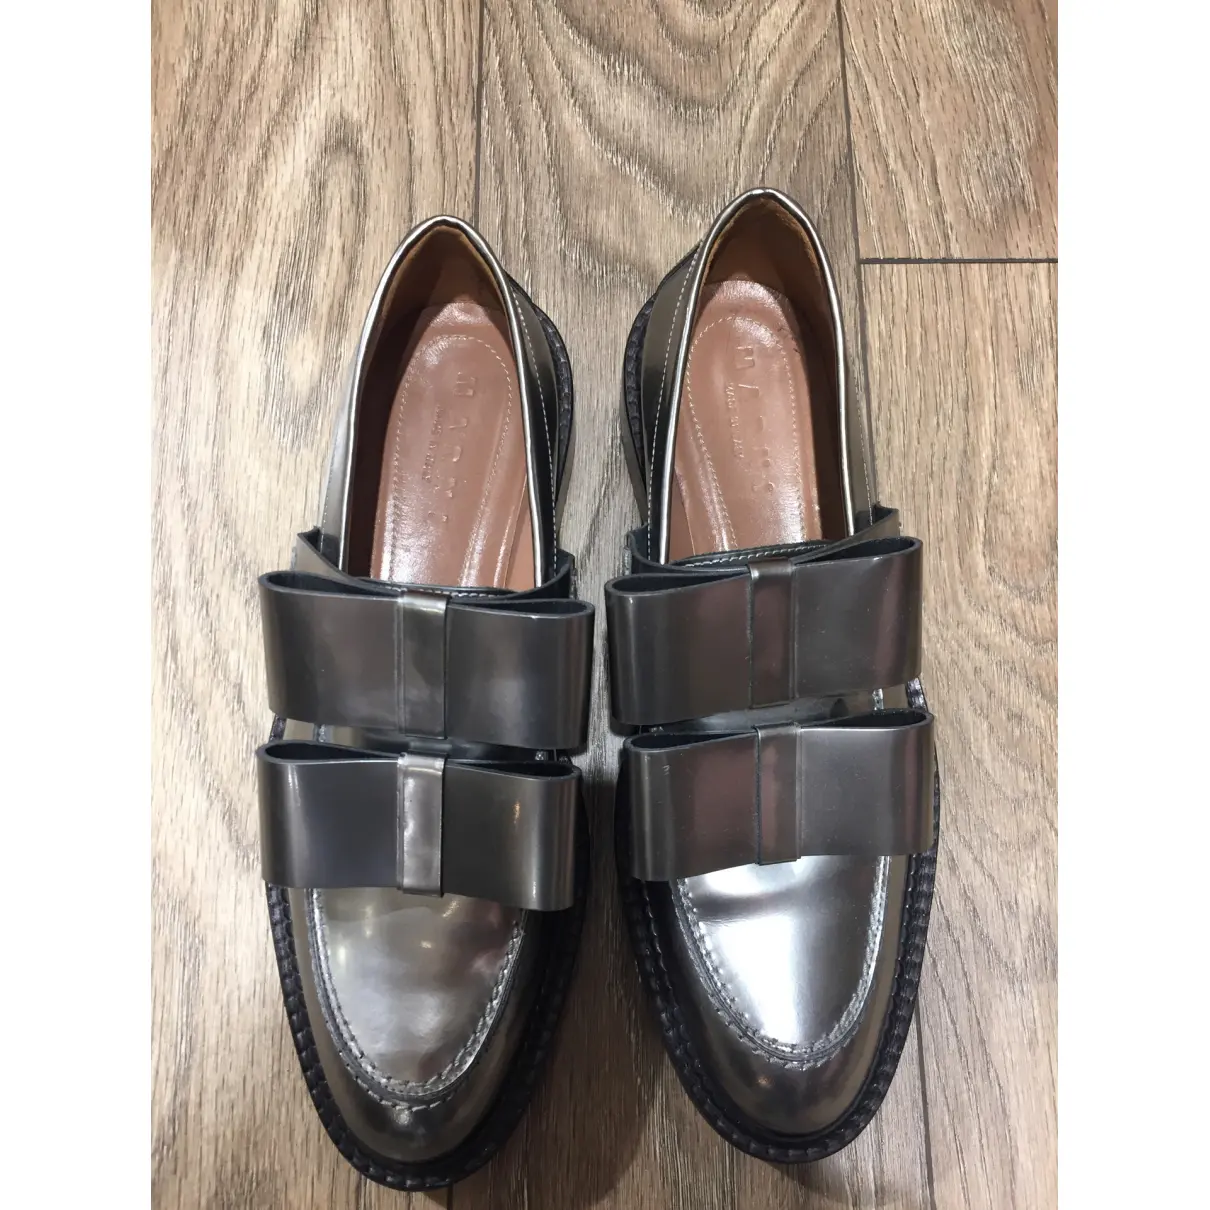 Buy Marni Leather flats online